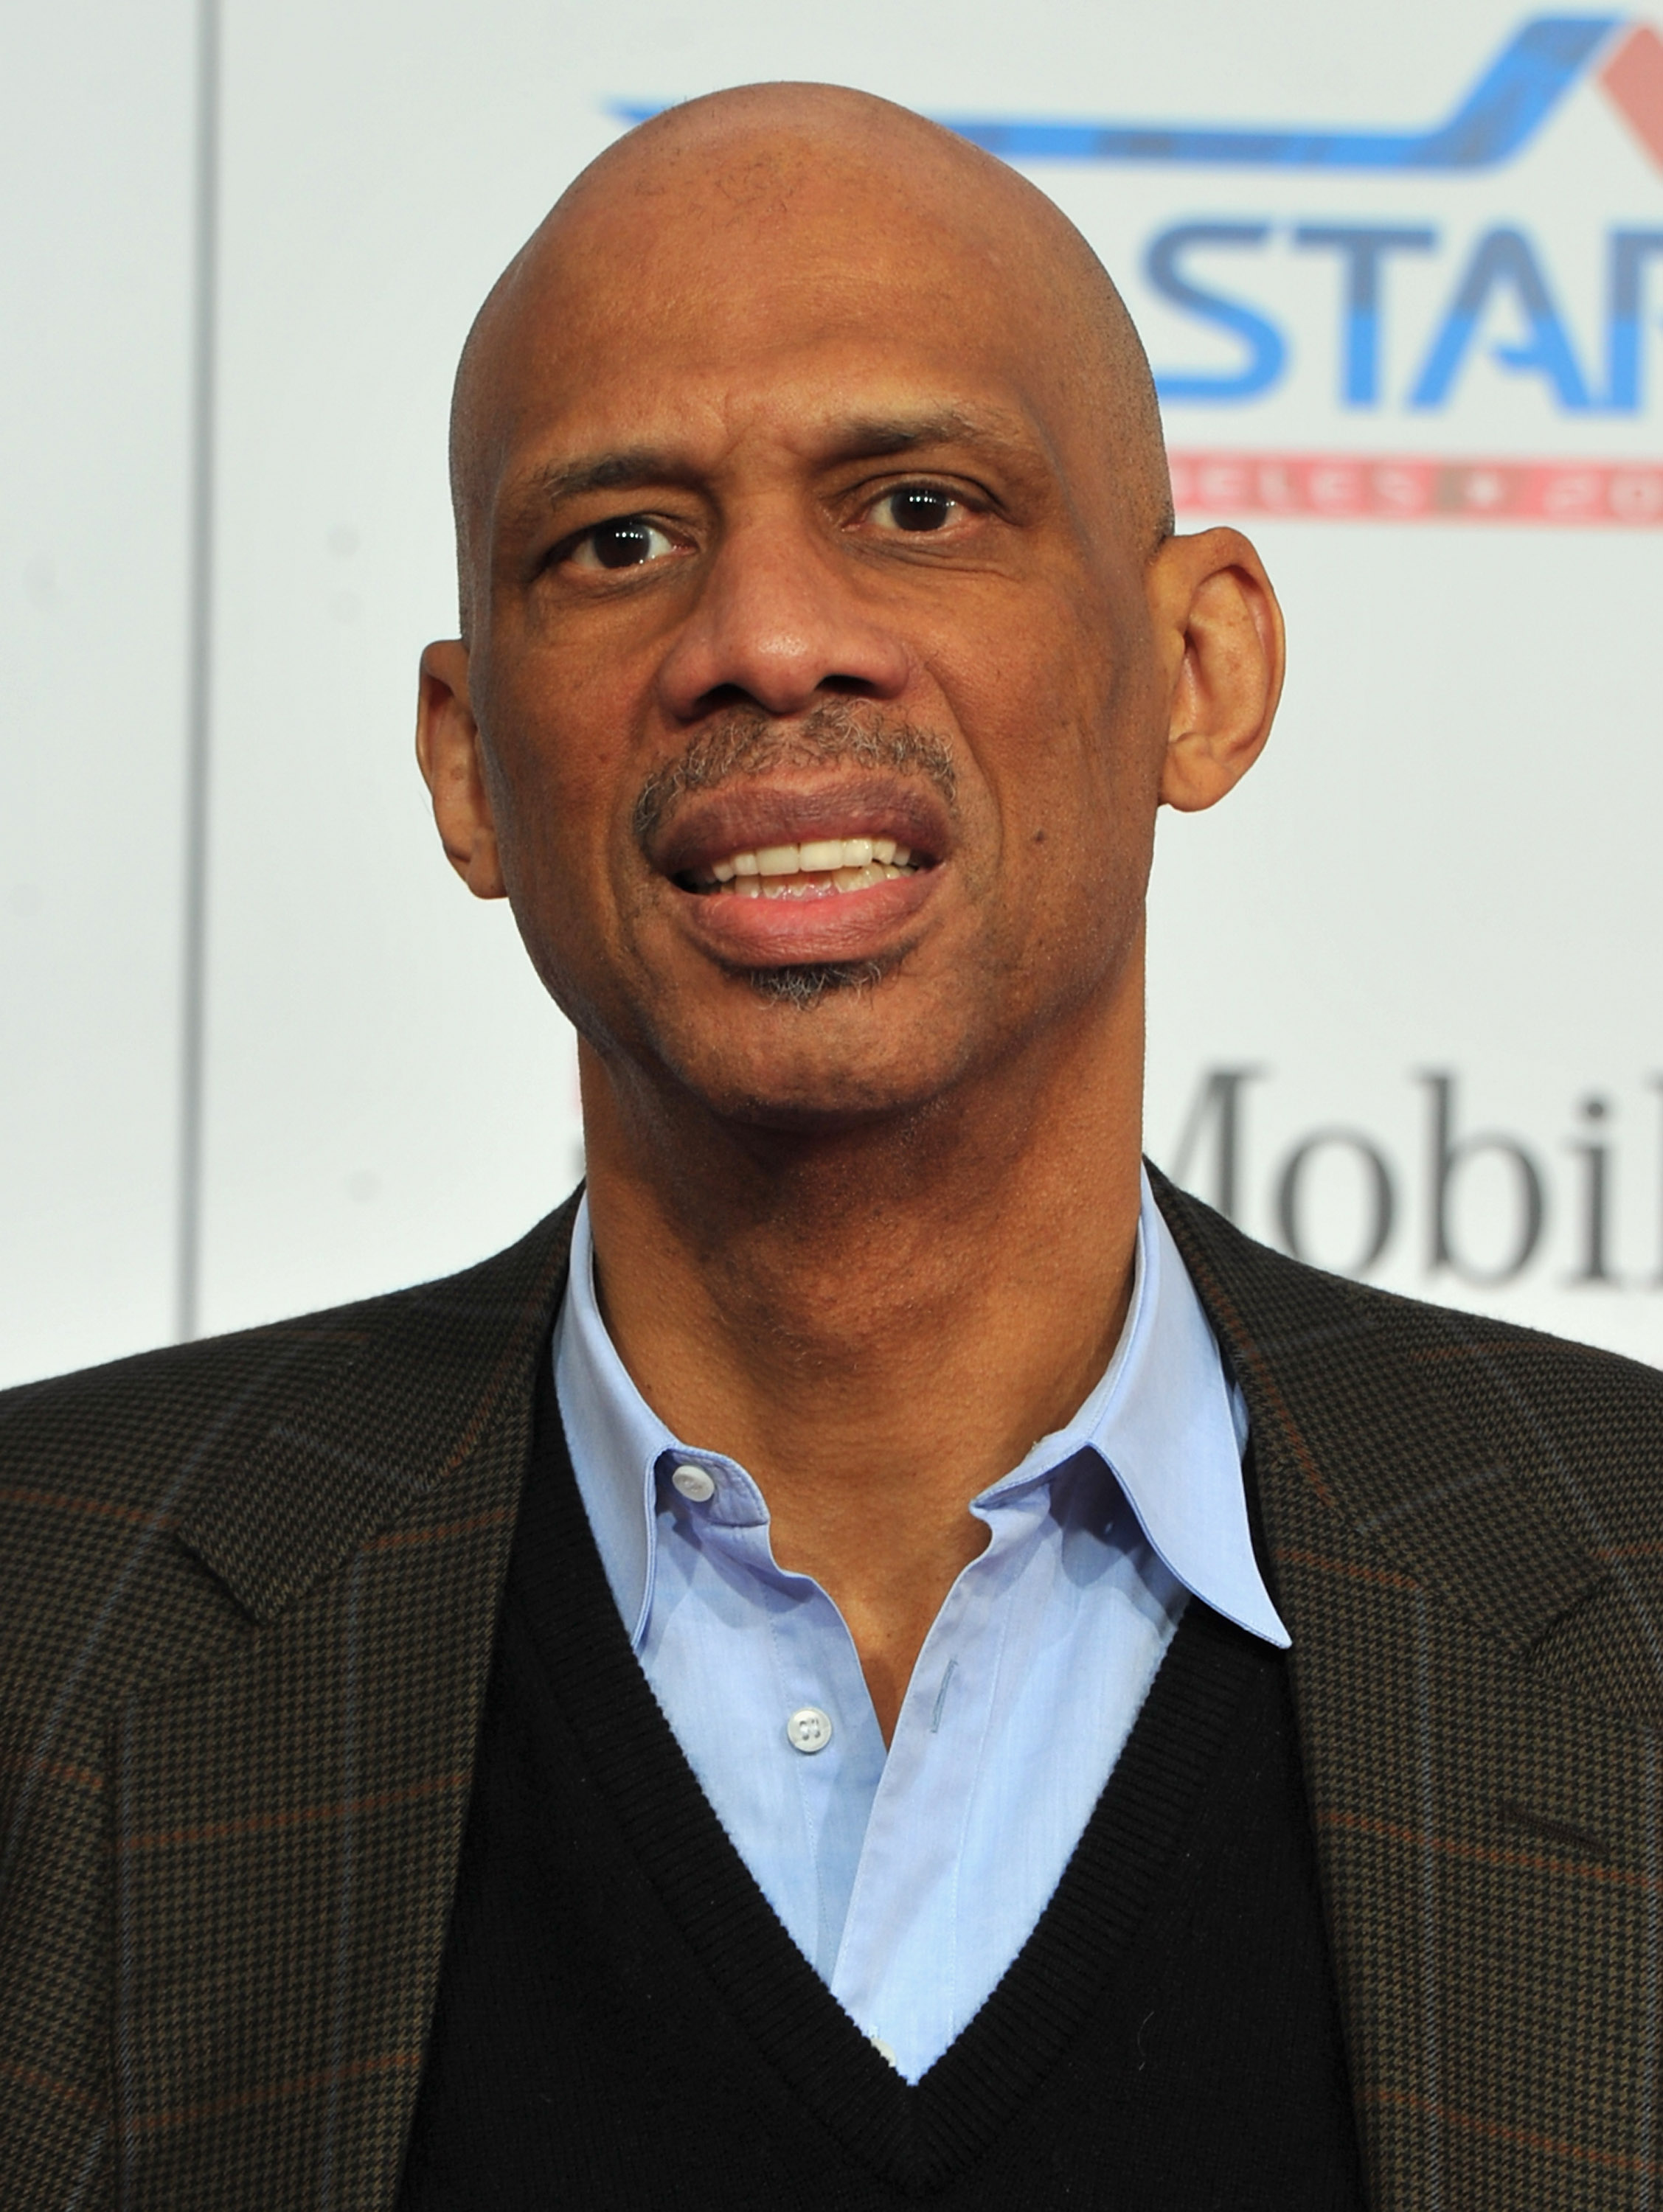 LOS ANGELES, CA - FEBRUARY 20:  Former NBA player Kareem Abdul Jabbar arrives to the T-Mobile Magenta Carpet at the 2011 NBA All-Star Game on February 20, 2011 in Los Angeles, California.  (Photo by Alberto E. Rodriguez/Getty Images)